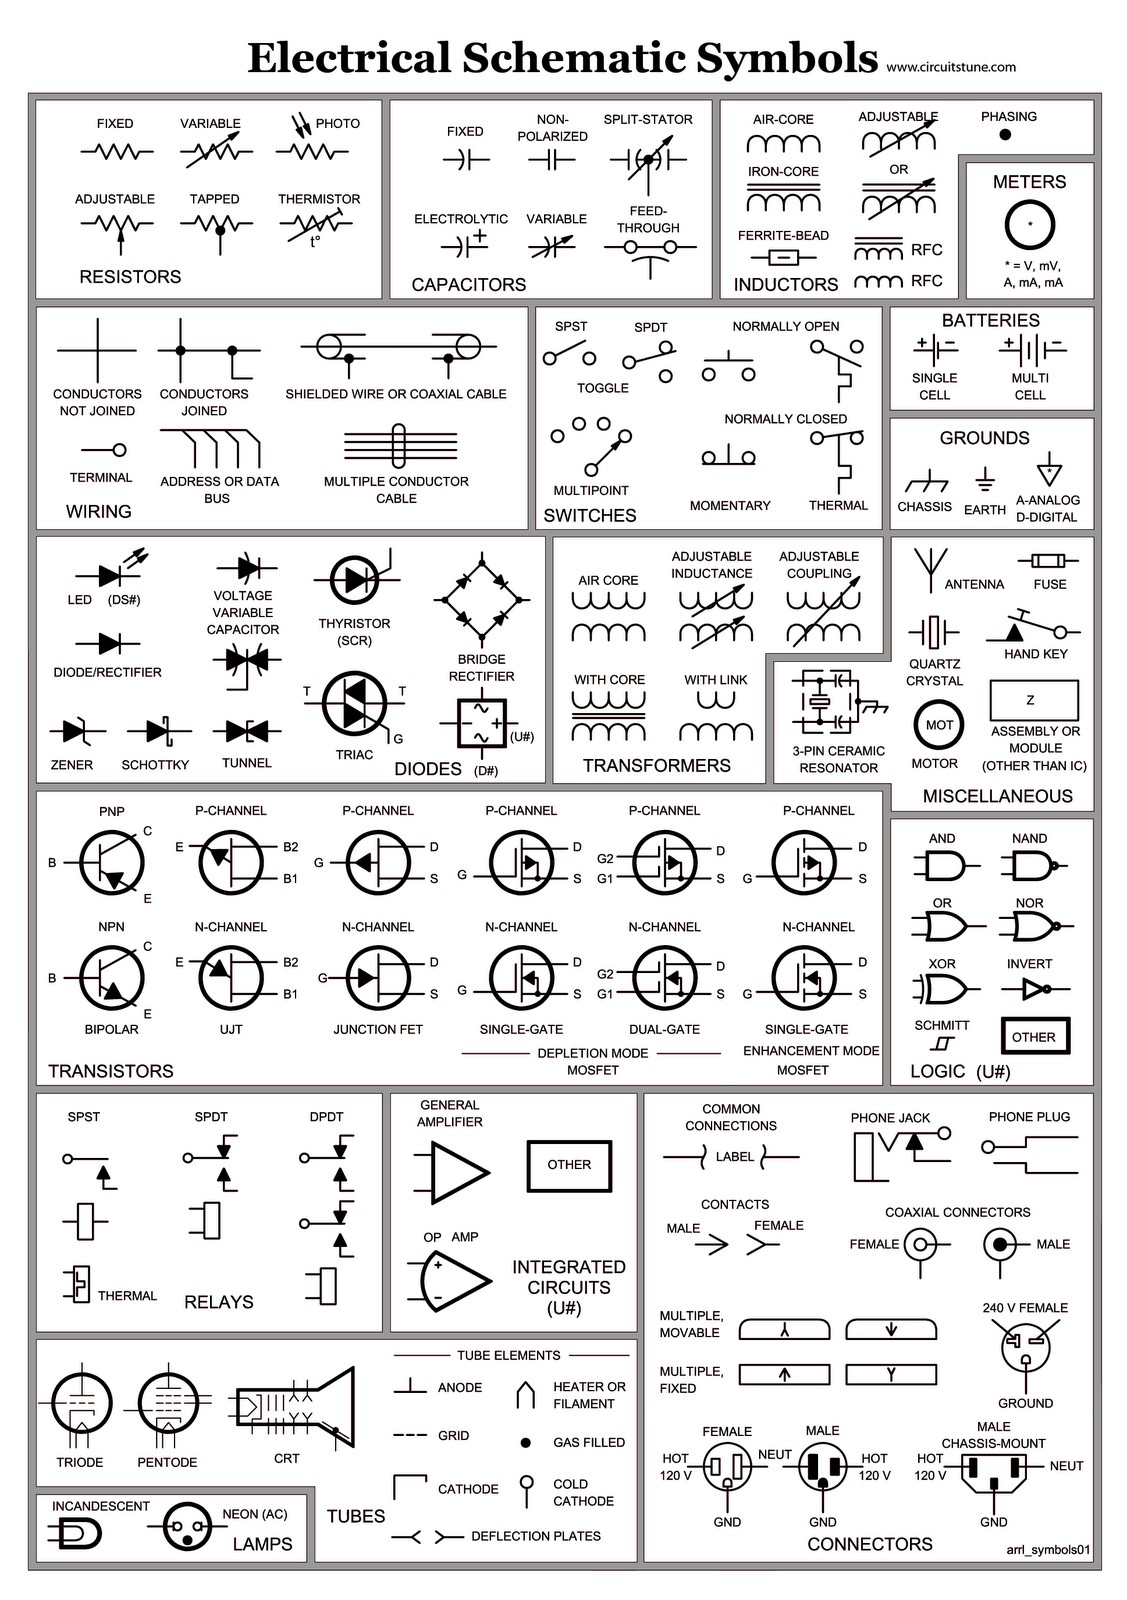 Wiring Diagram Reading How To Read Electrical Drawings Pdf For Bright Symbols